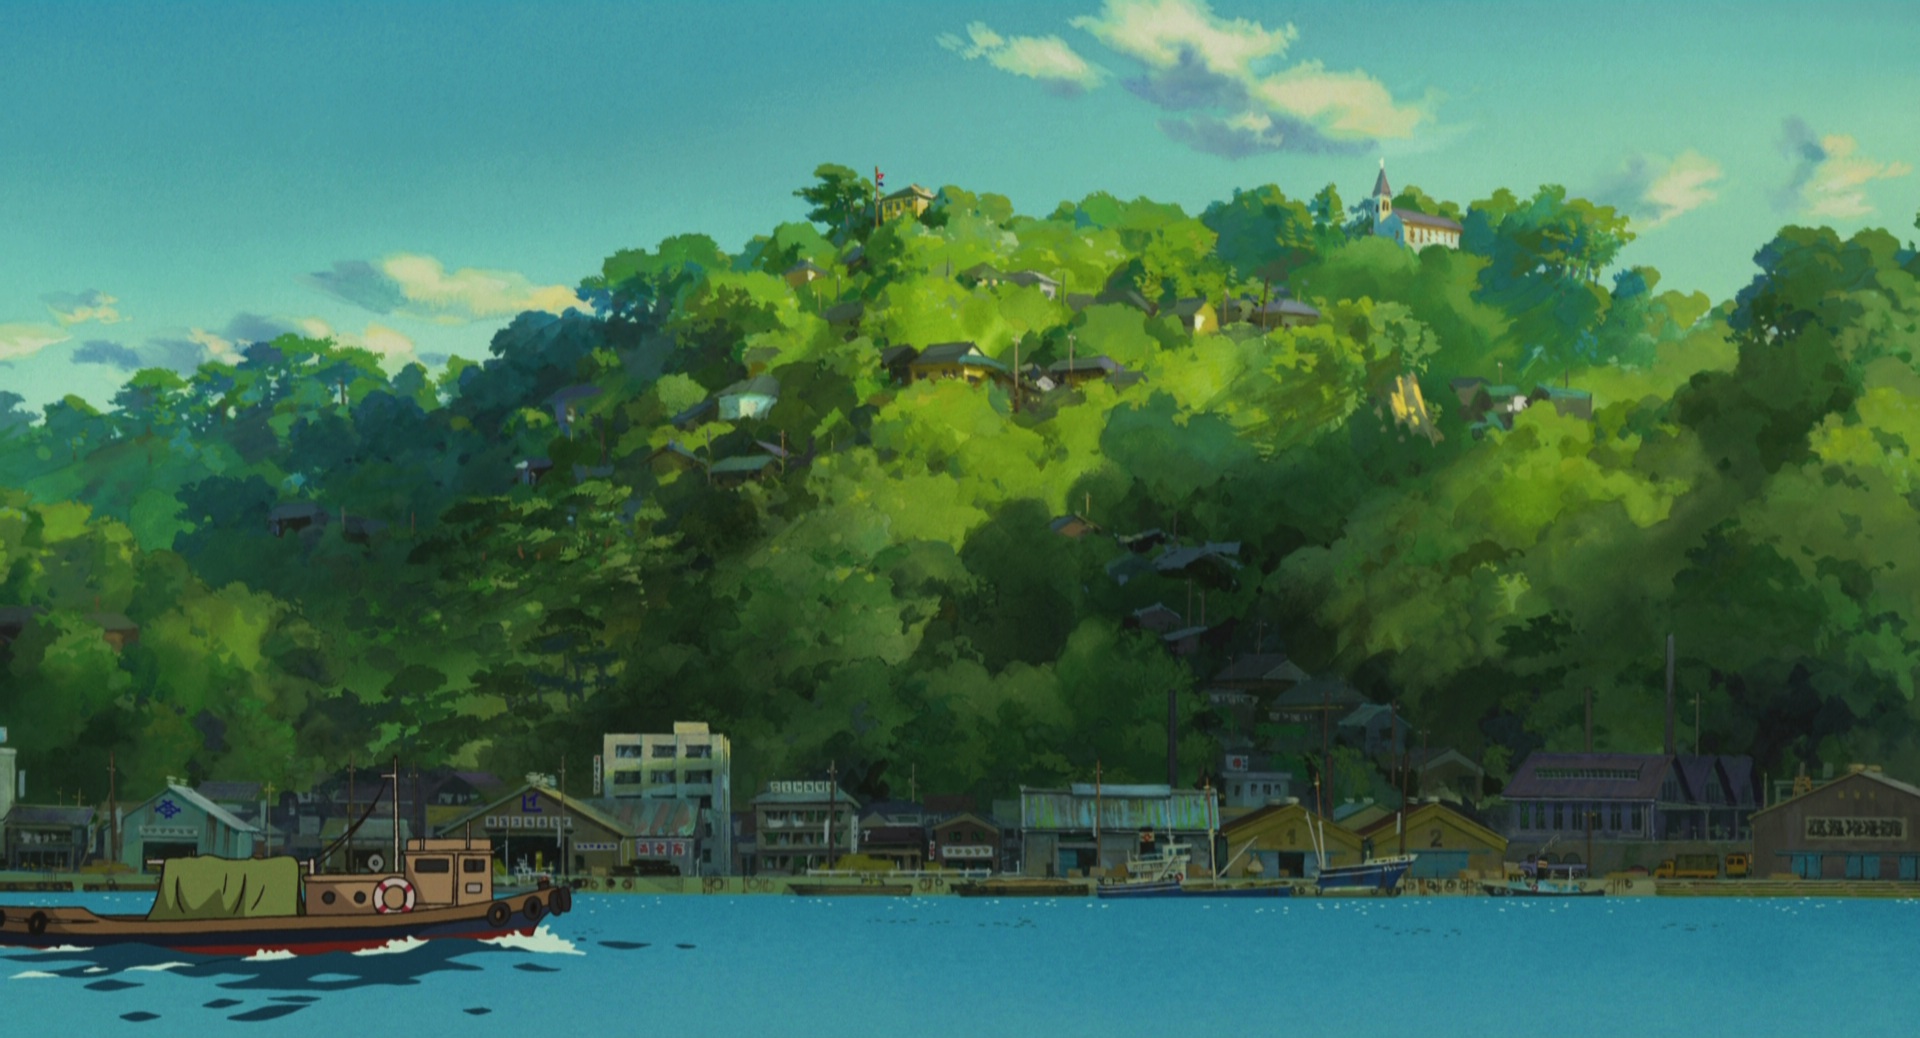 Anime From Up On Poppy Hill HD Wallpaper | Background Image